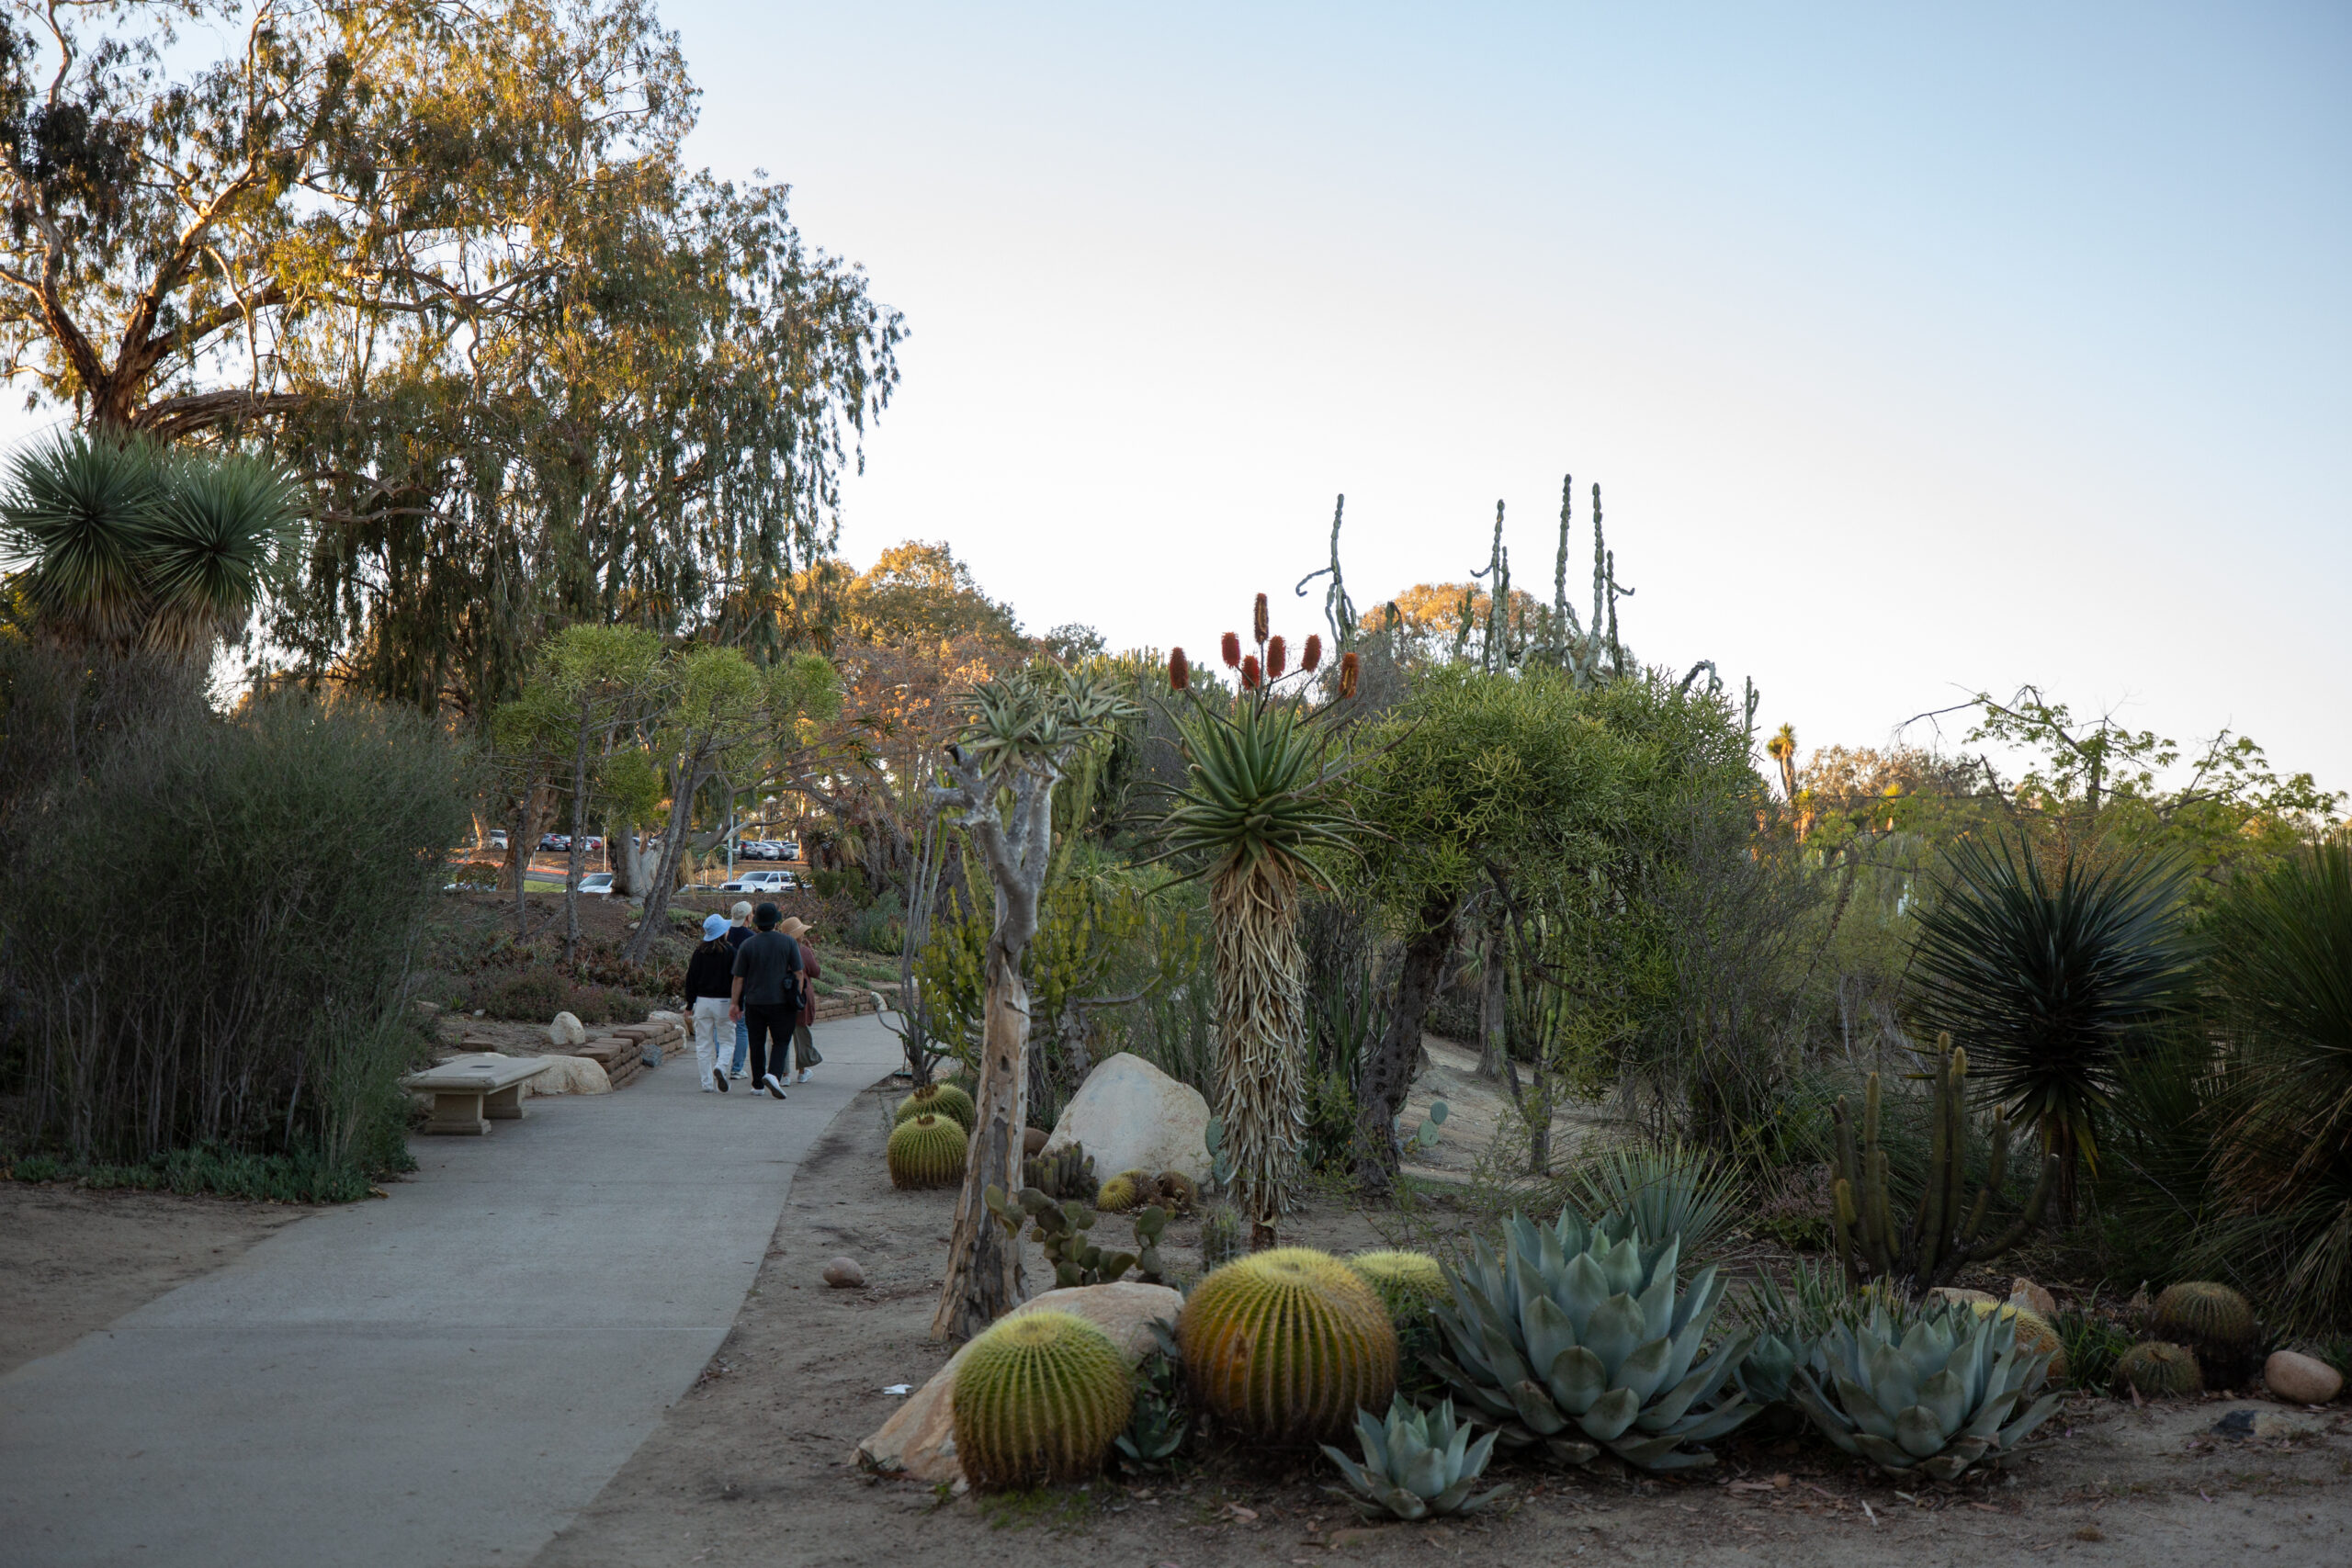 Yucca and other desert shrubs and plants surrounding a cement walkway in the Desert garden.